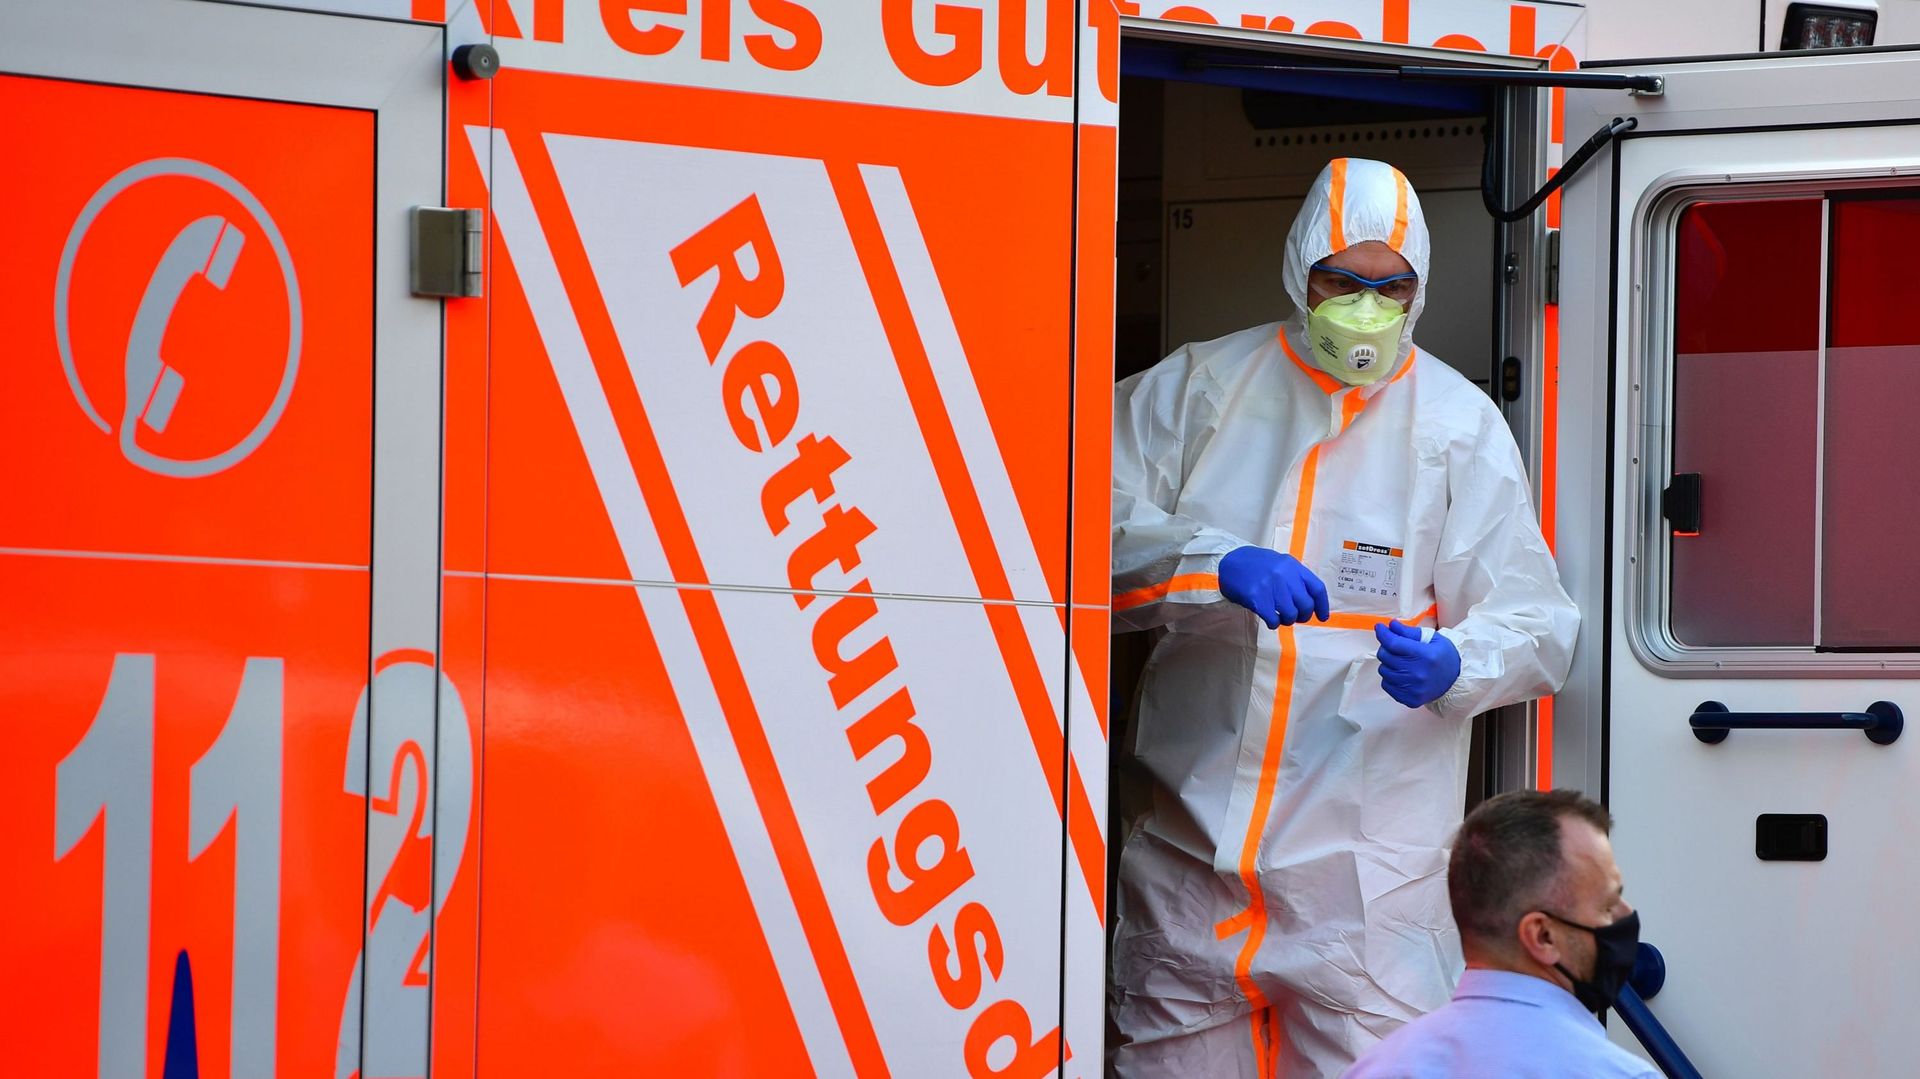 Guetersloh Region Considers Lockdown As Covid-19 Infections Skyrocket Among Meat Plant Workers